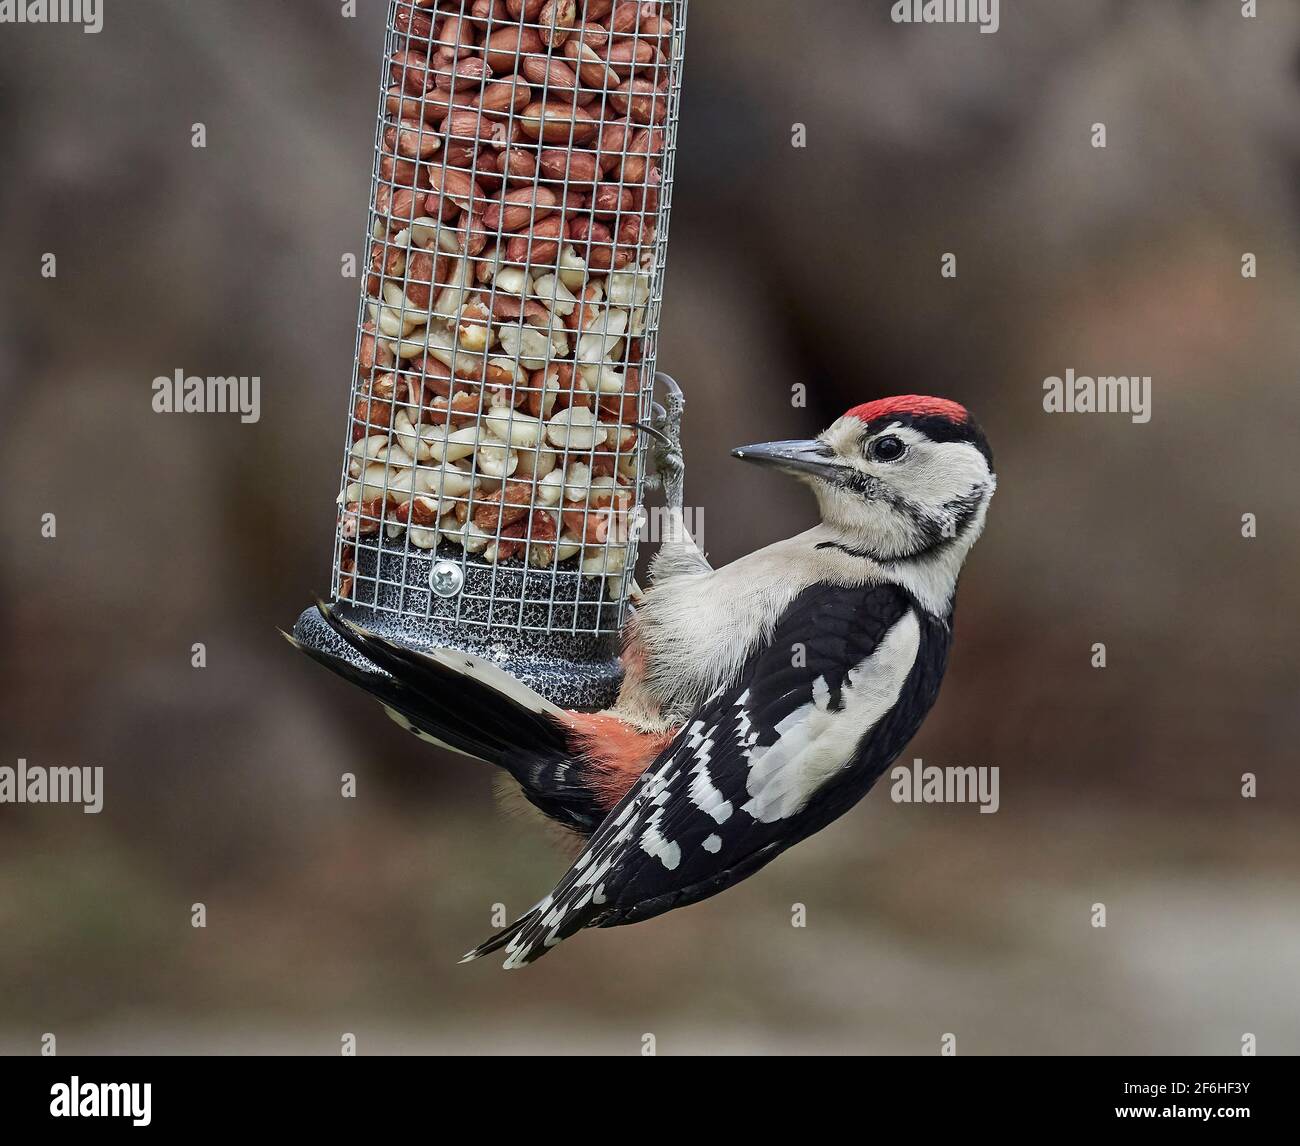 A single juvenile Great Spotted Woodpecker (Dendrocopos Major) hanging on to a bird feeder full of peanuts in a British garden. Stock Photo